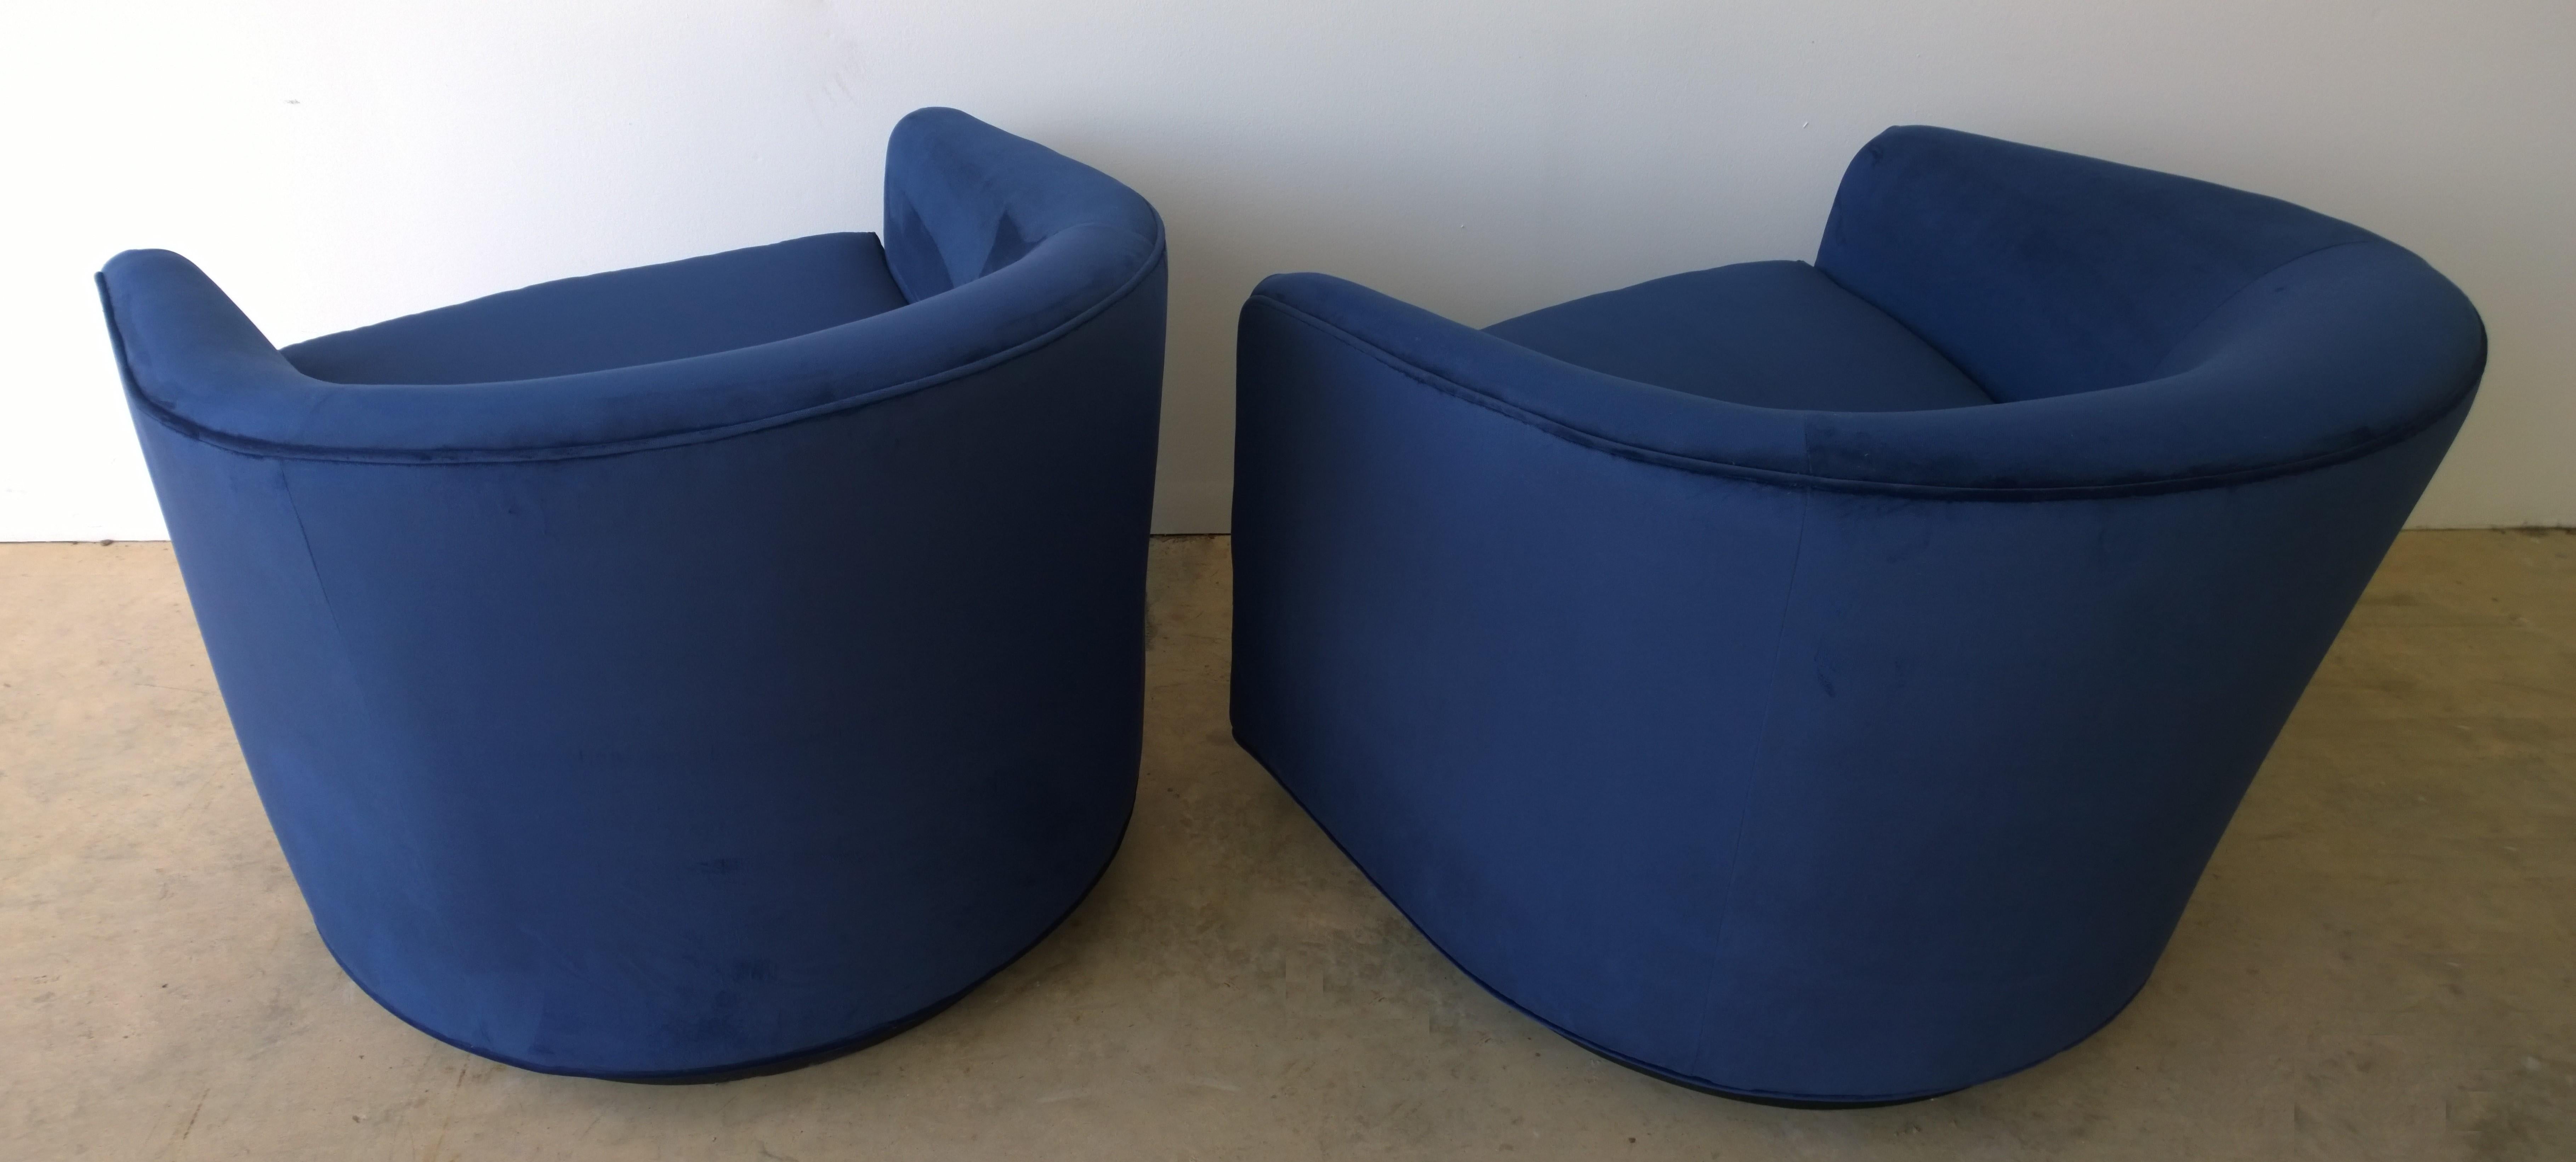 Pair of Baughman Style New Blue Cotton Velvet Swivel Chairs w/ Ebony Wood Bases For Sale 1